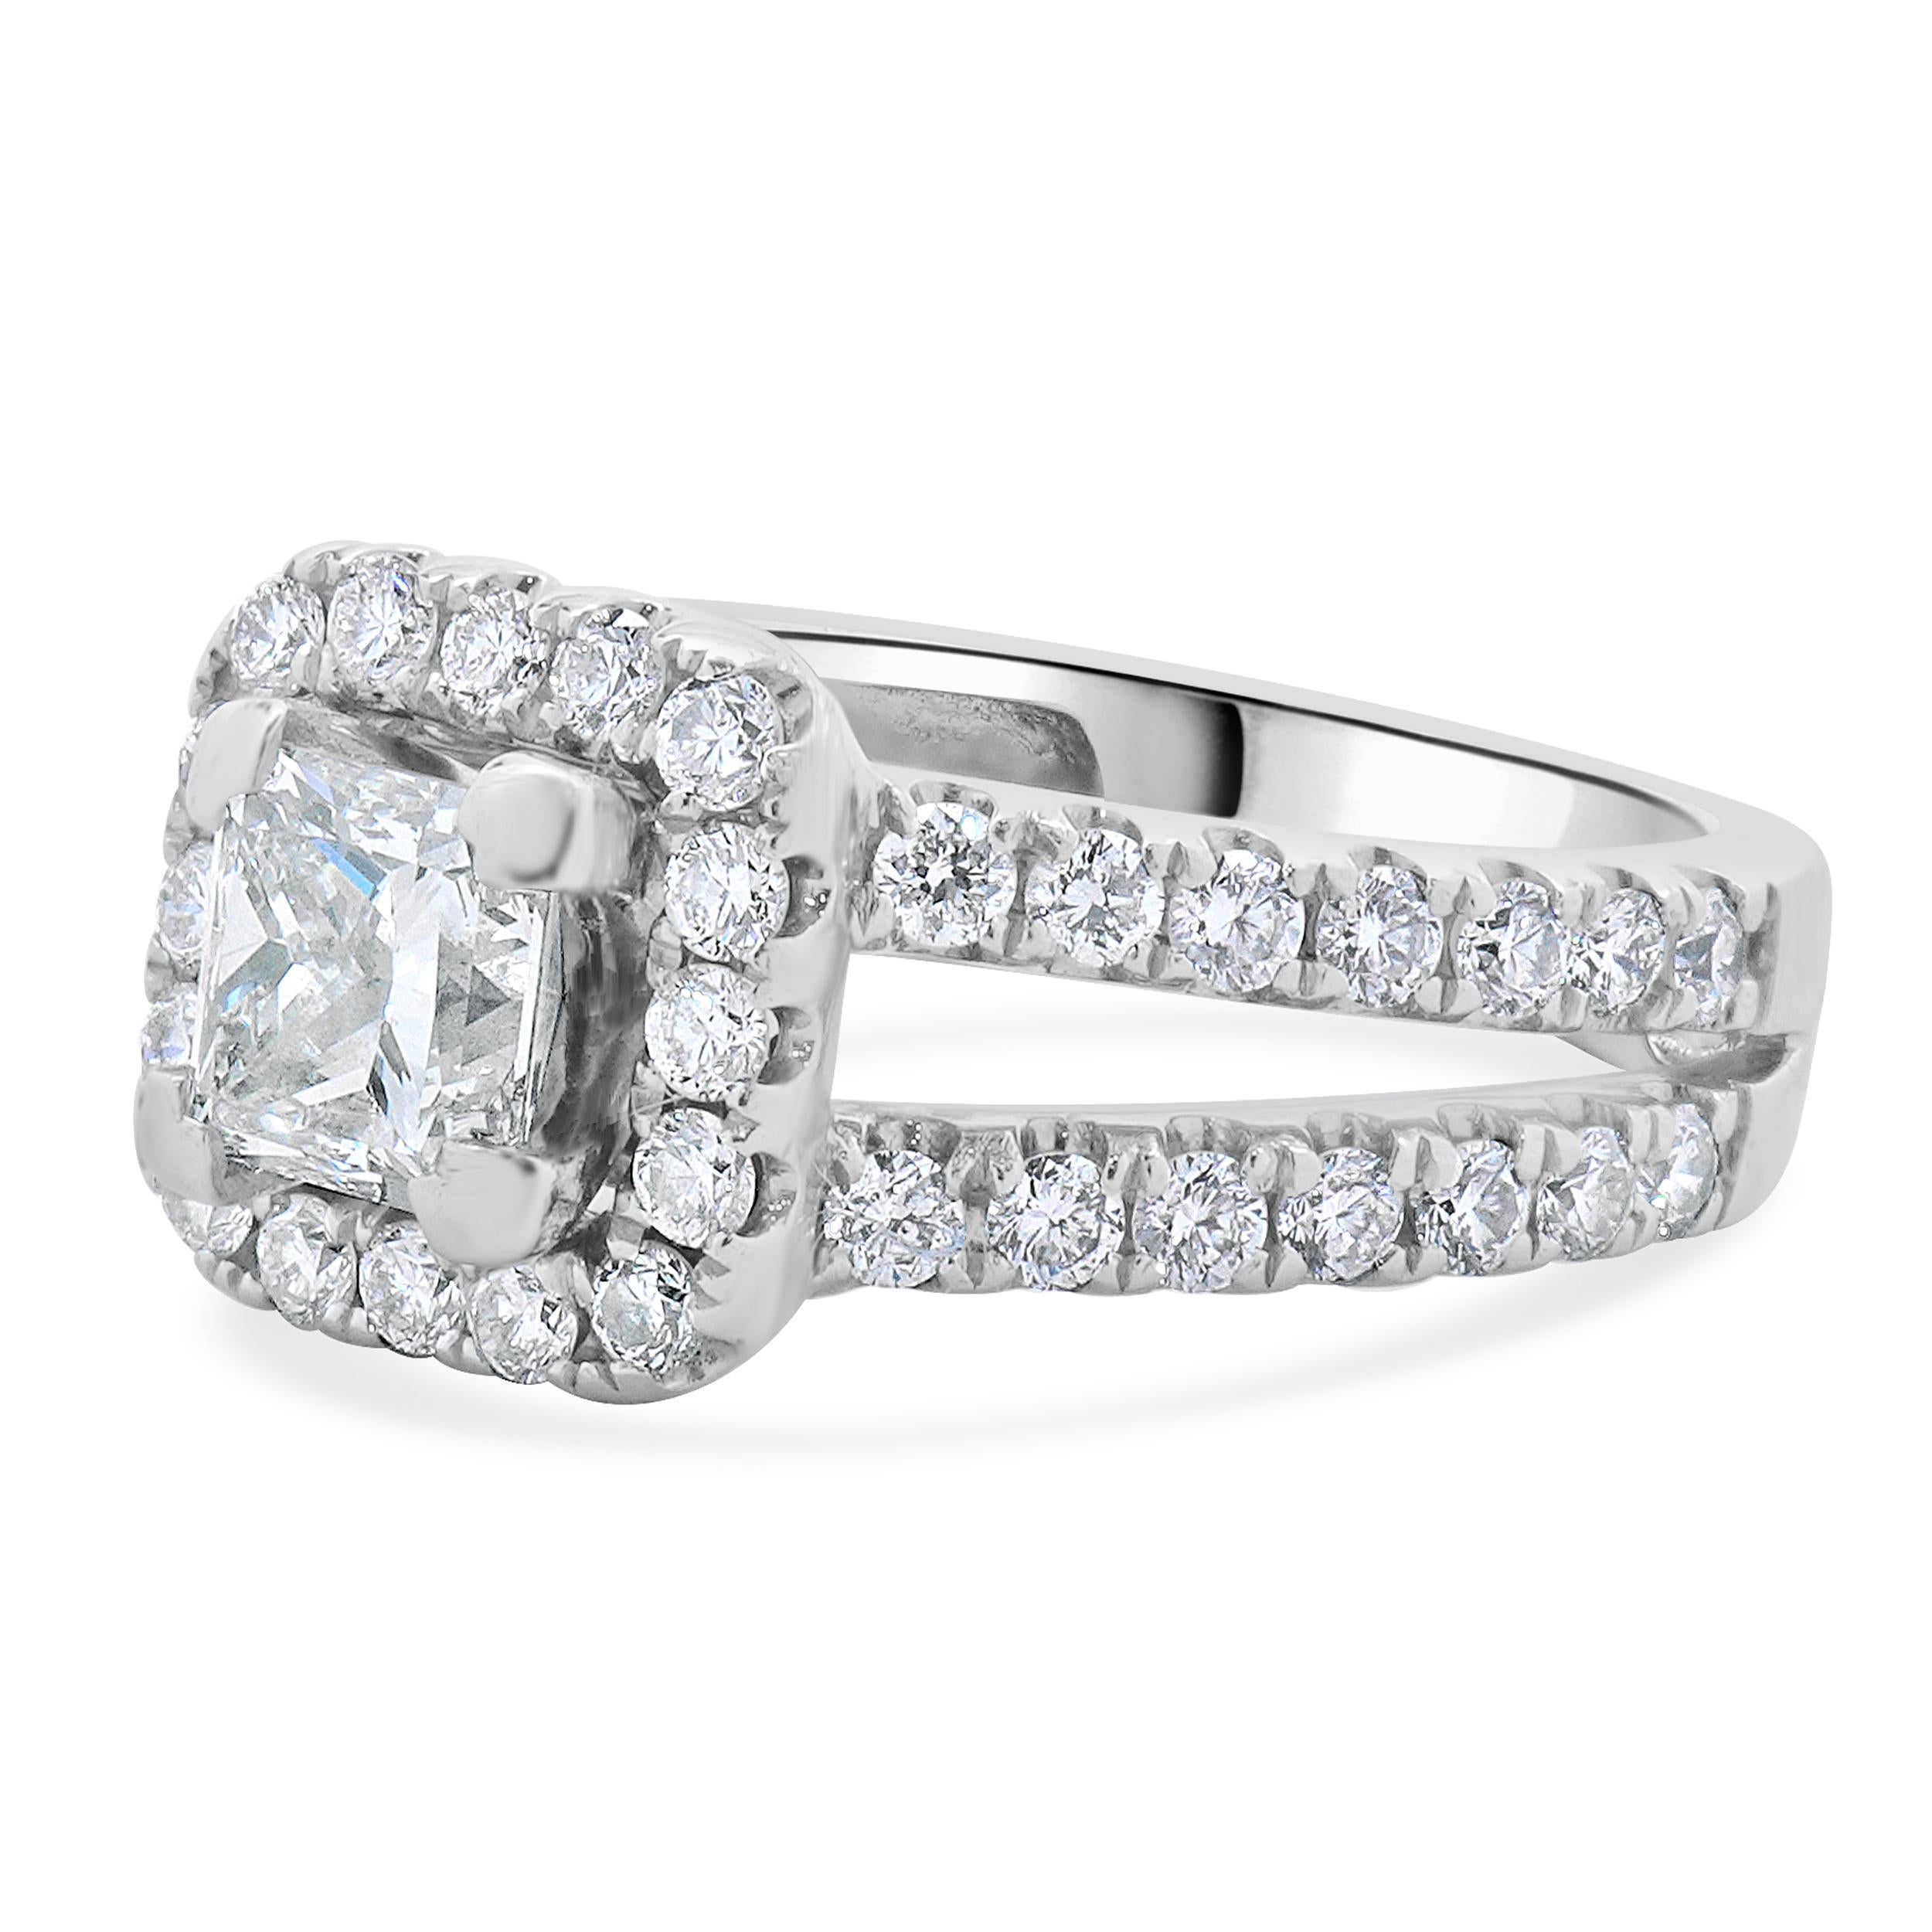 Designer: custom
Material: 14K white gold
Diamond: 1 princess cut = 0.78ct
Color: I
Clarity: VS1
Diamond: 56 round brilliant cut = 0.91cttw
Color: H
Clarity: SI1
Dimensions: ring top measures 9.8mm wide
Ring Size: 5 (complimentary sizing